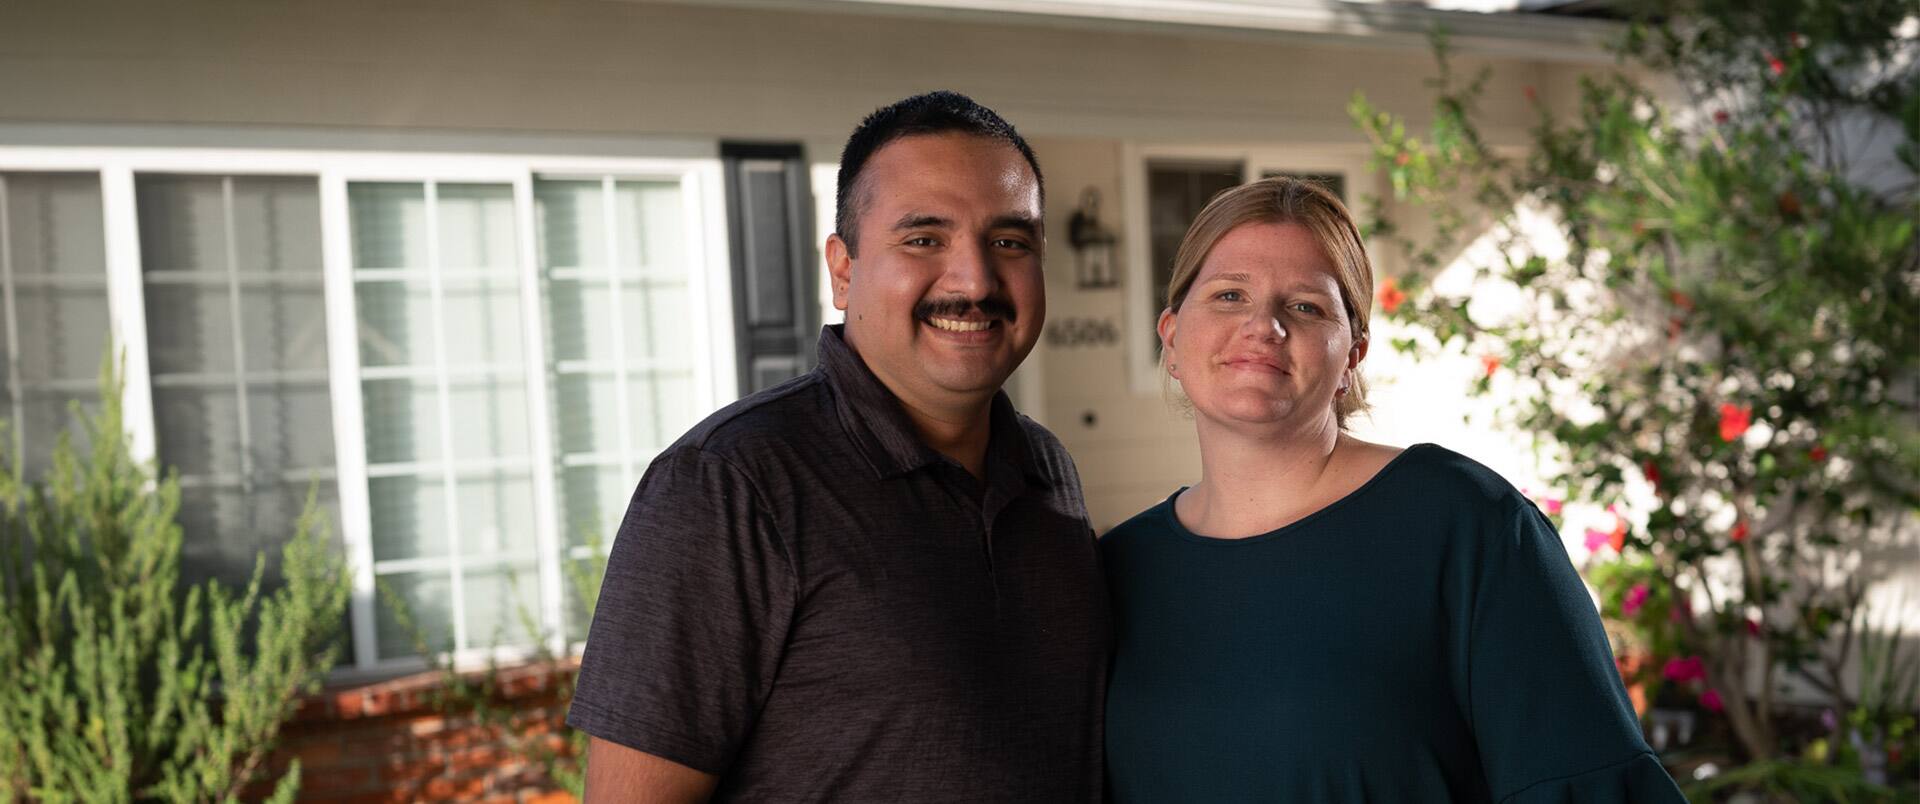 "Shelly & Salvador Villa, a married couple who earned their degrees from SNHU in 2019,  standing next to one another in their front yard with plants and a hite house in the  background."